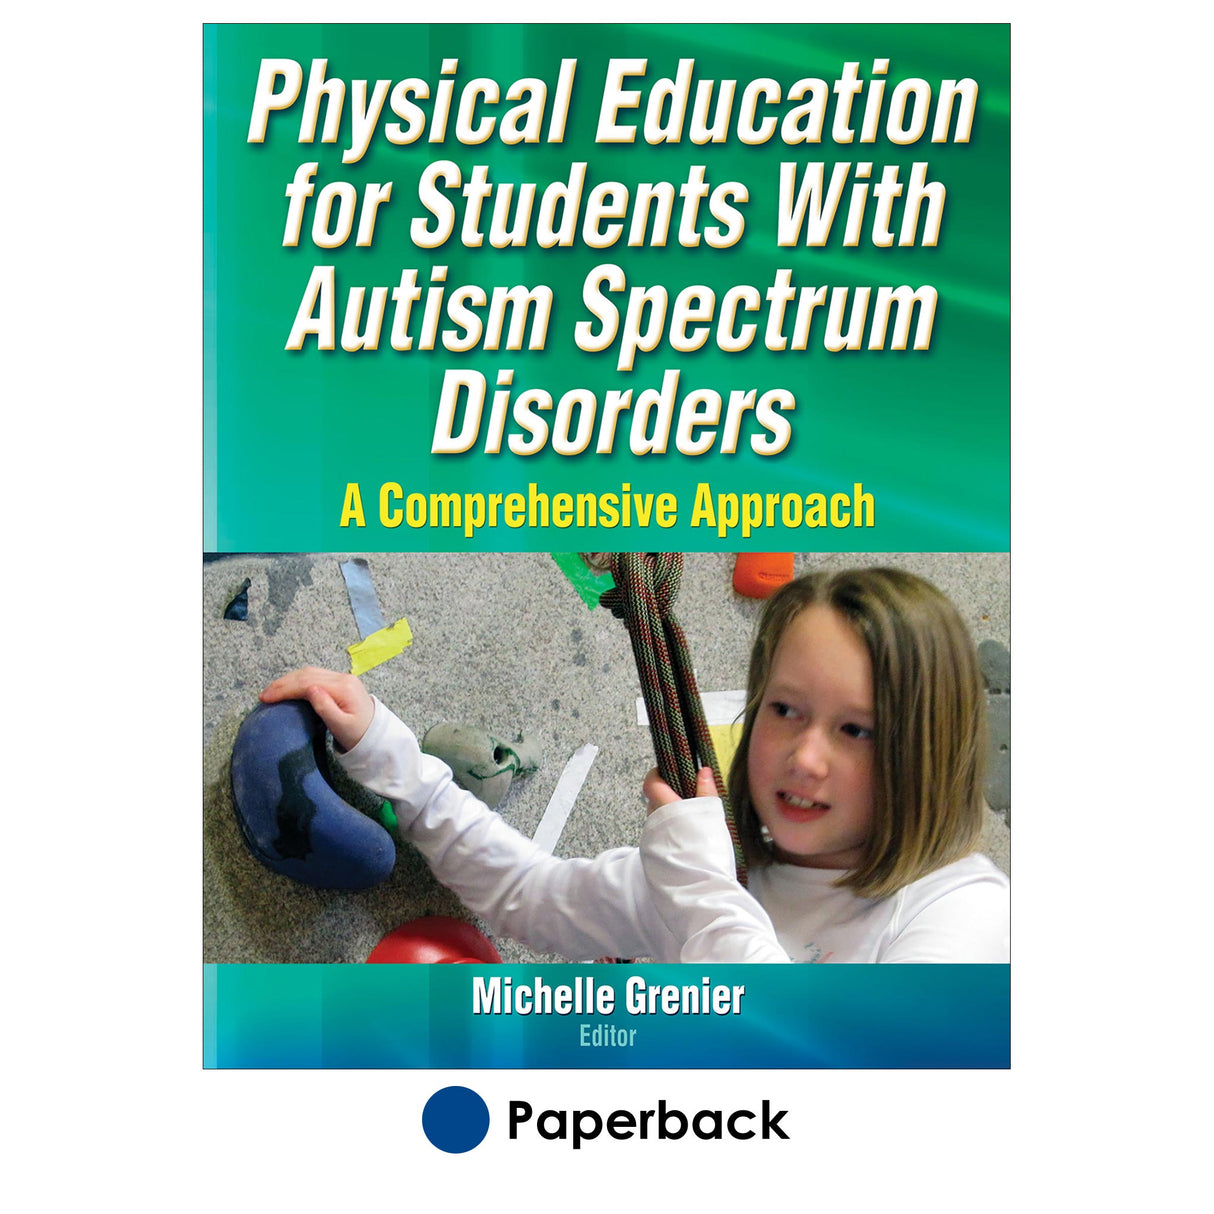 Physical Education for Students With Autism Spectrum Disorders